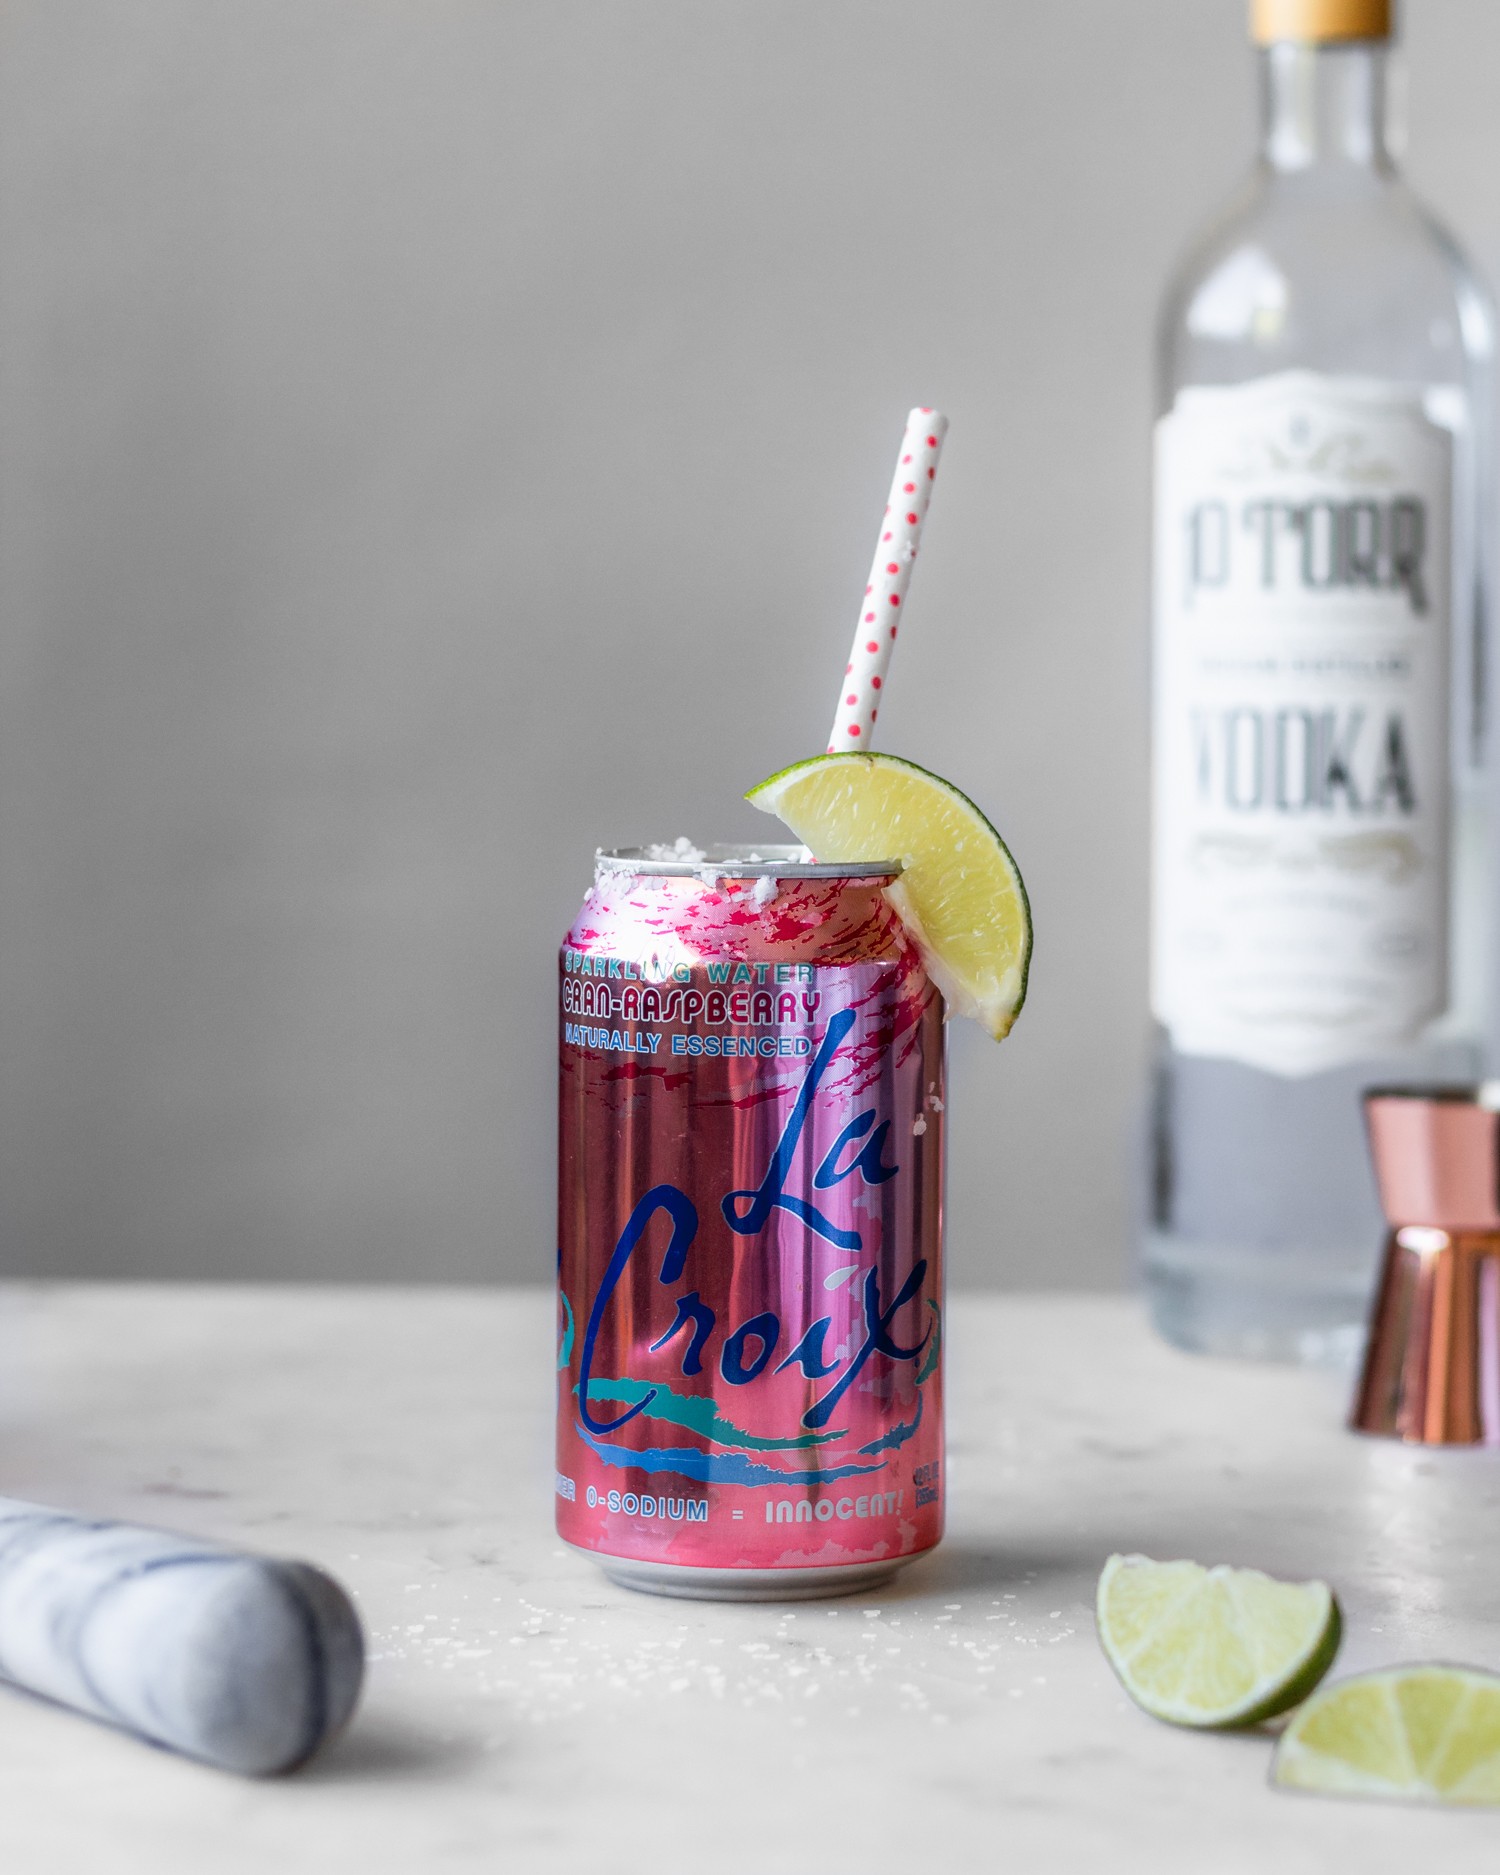 A straight on image of a can of cran-raspberry La Croix with a lime wedge and polka dot straw next to a bottle of vodka, lime wedges, and marble pestle with a white background.